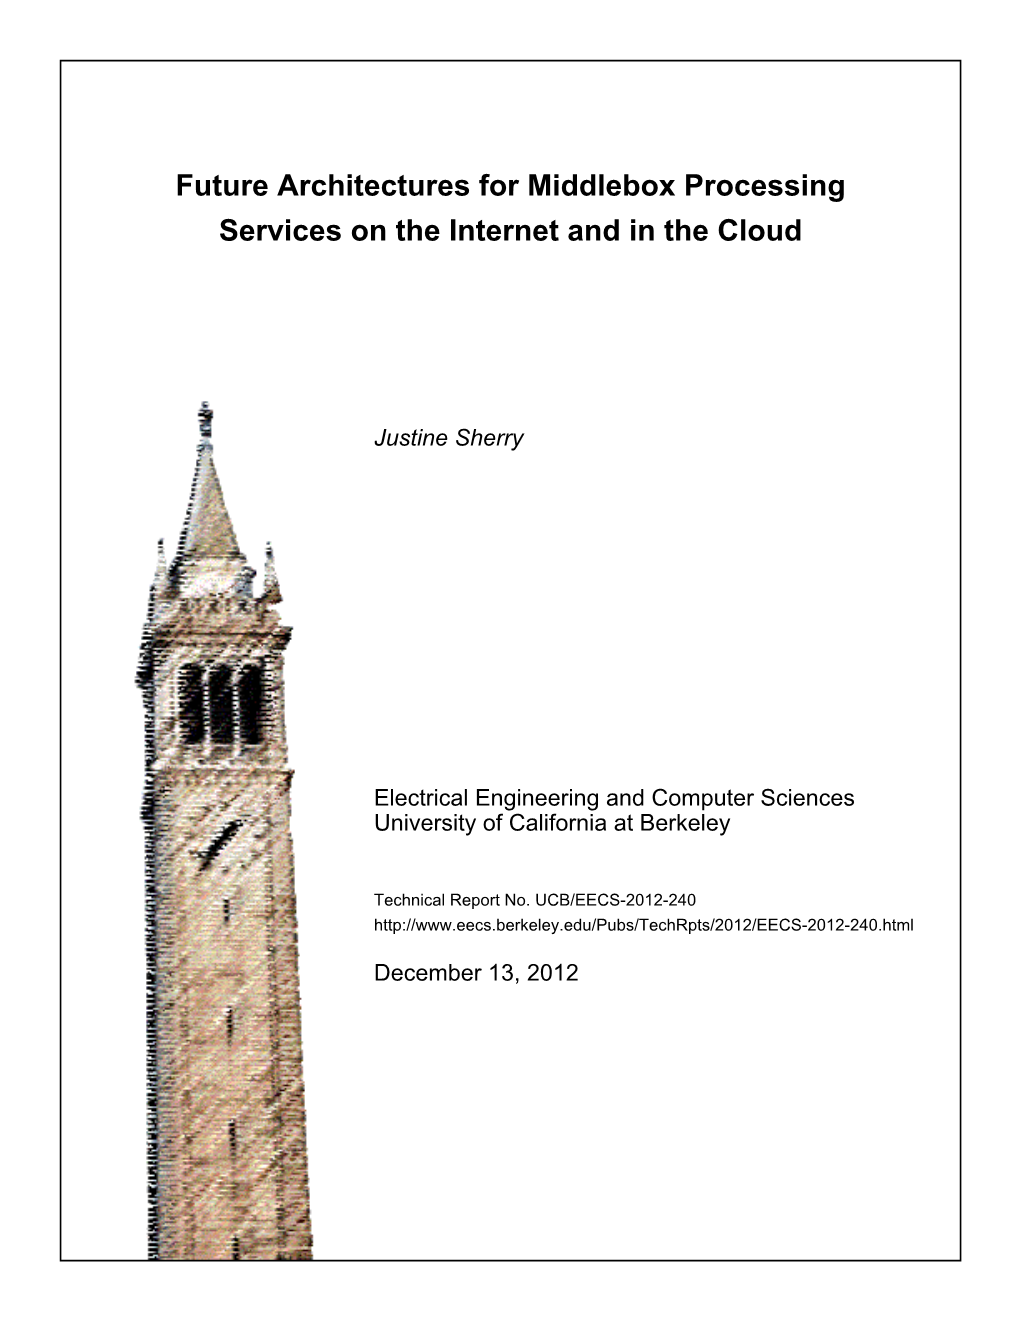 Future Architectures for Middlebox Processing Services on the Internet and in the Cloud